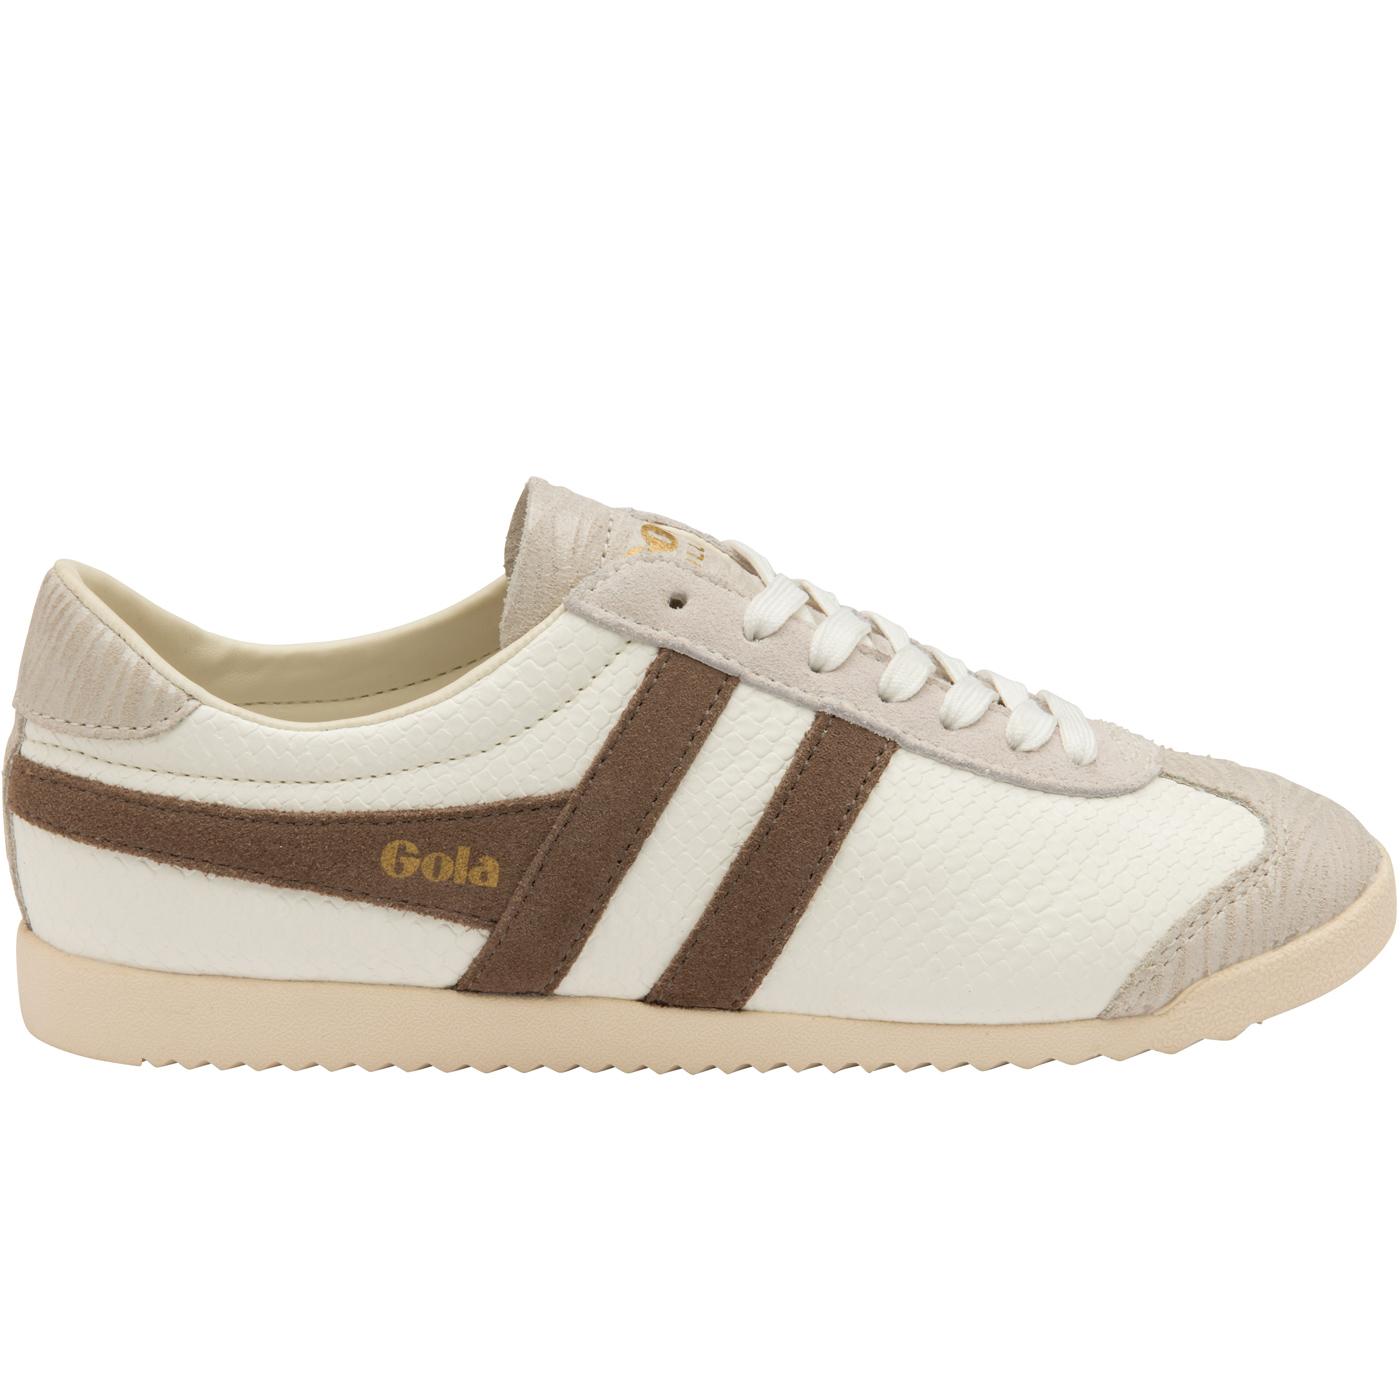 GOLA Bullet Reptile Women's Retro Trainers in Off White/Taupe